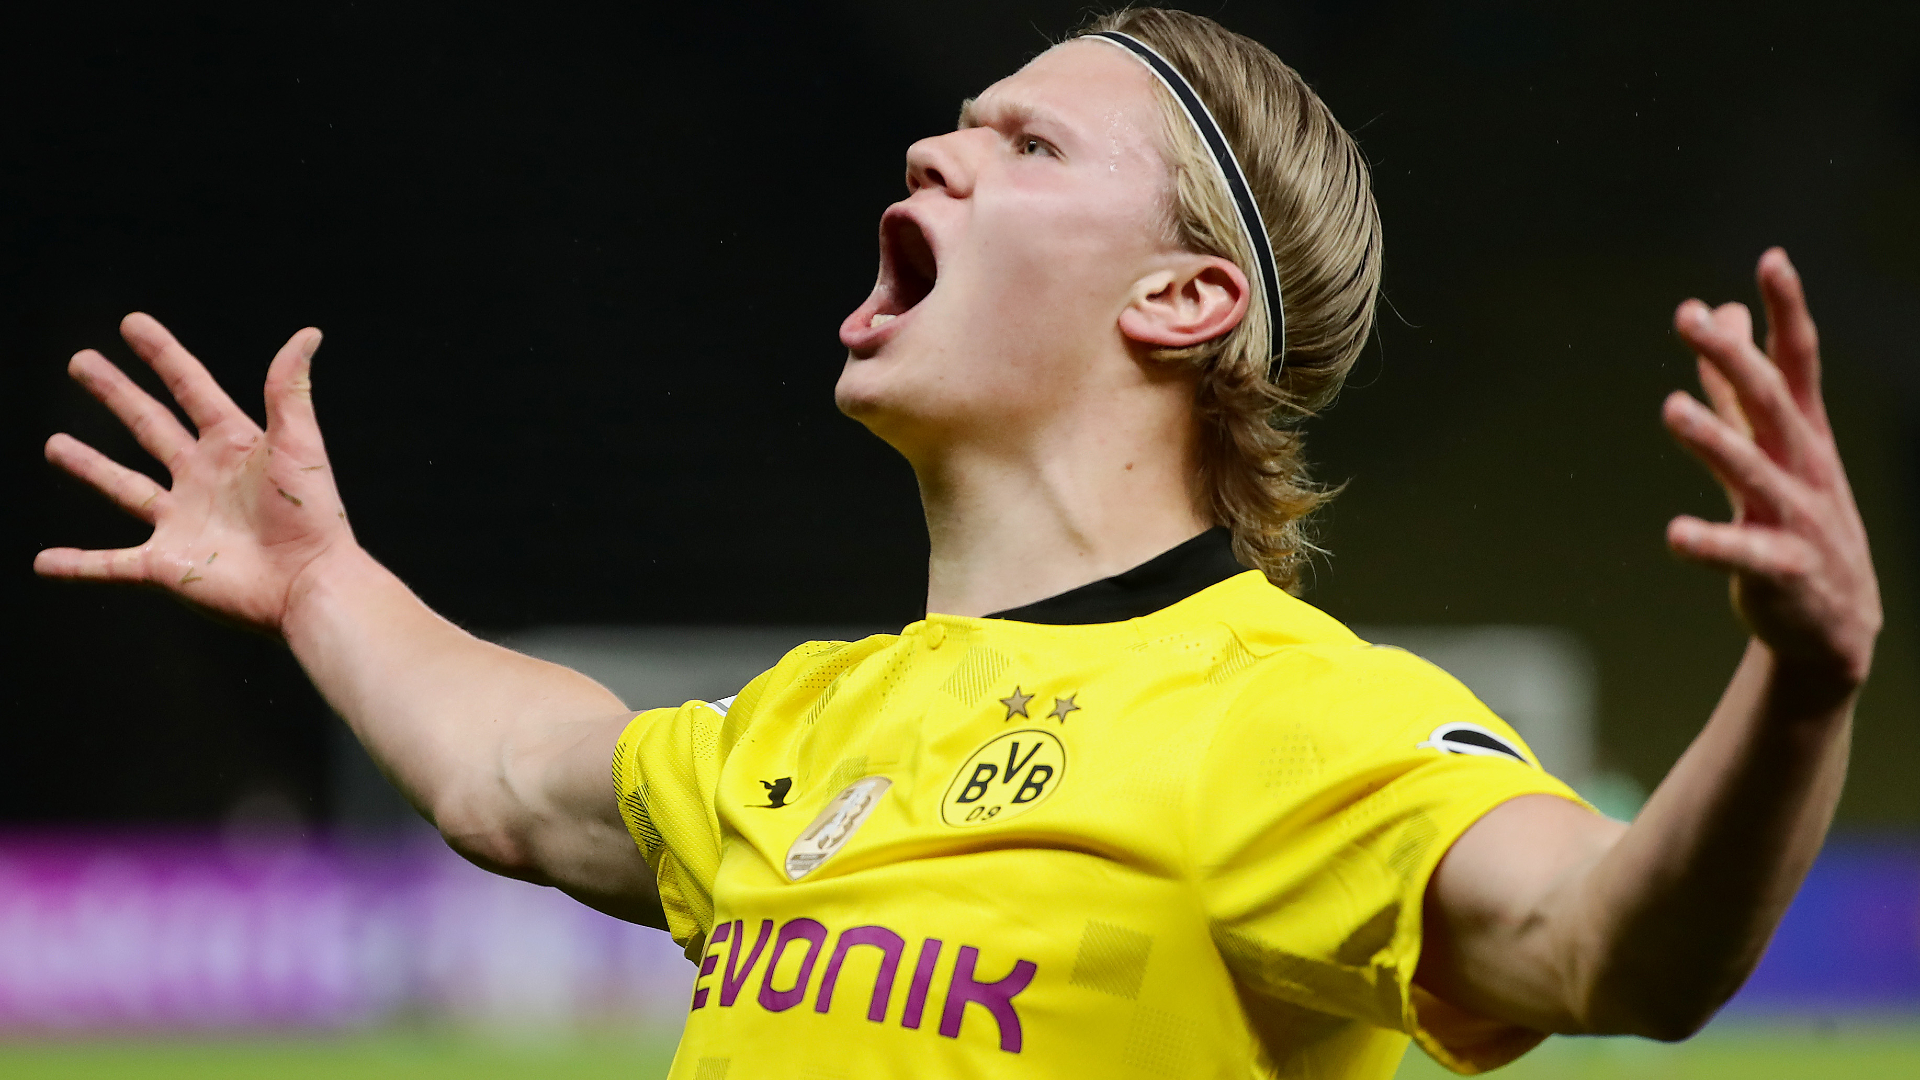 €175m is a ‘lot of money’ says Haaland as Borussia Dortmund striker responds to Chelsea rumours